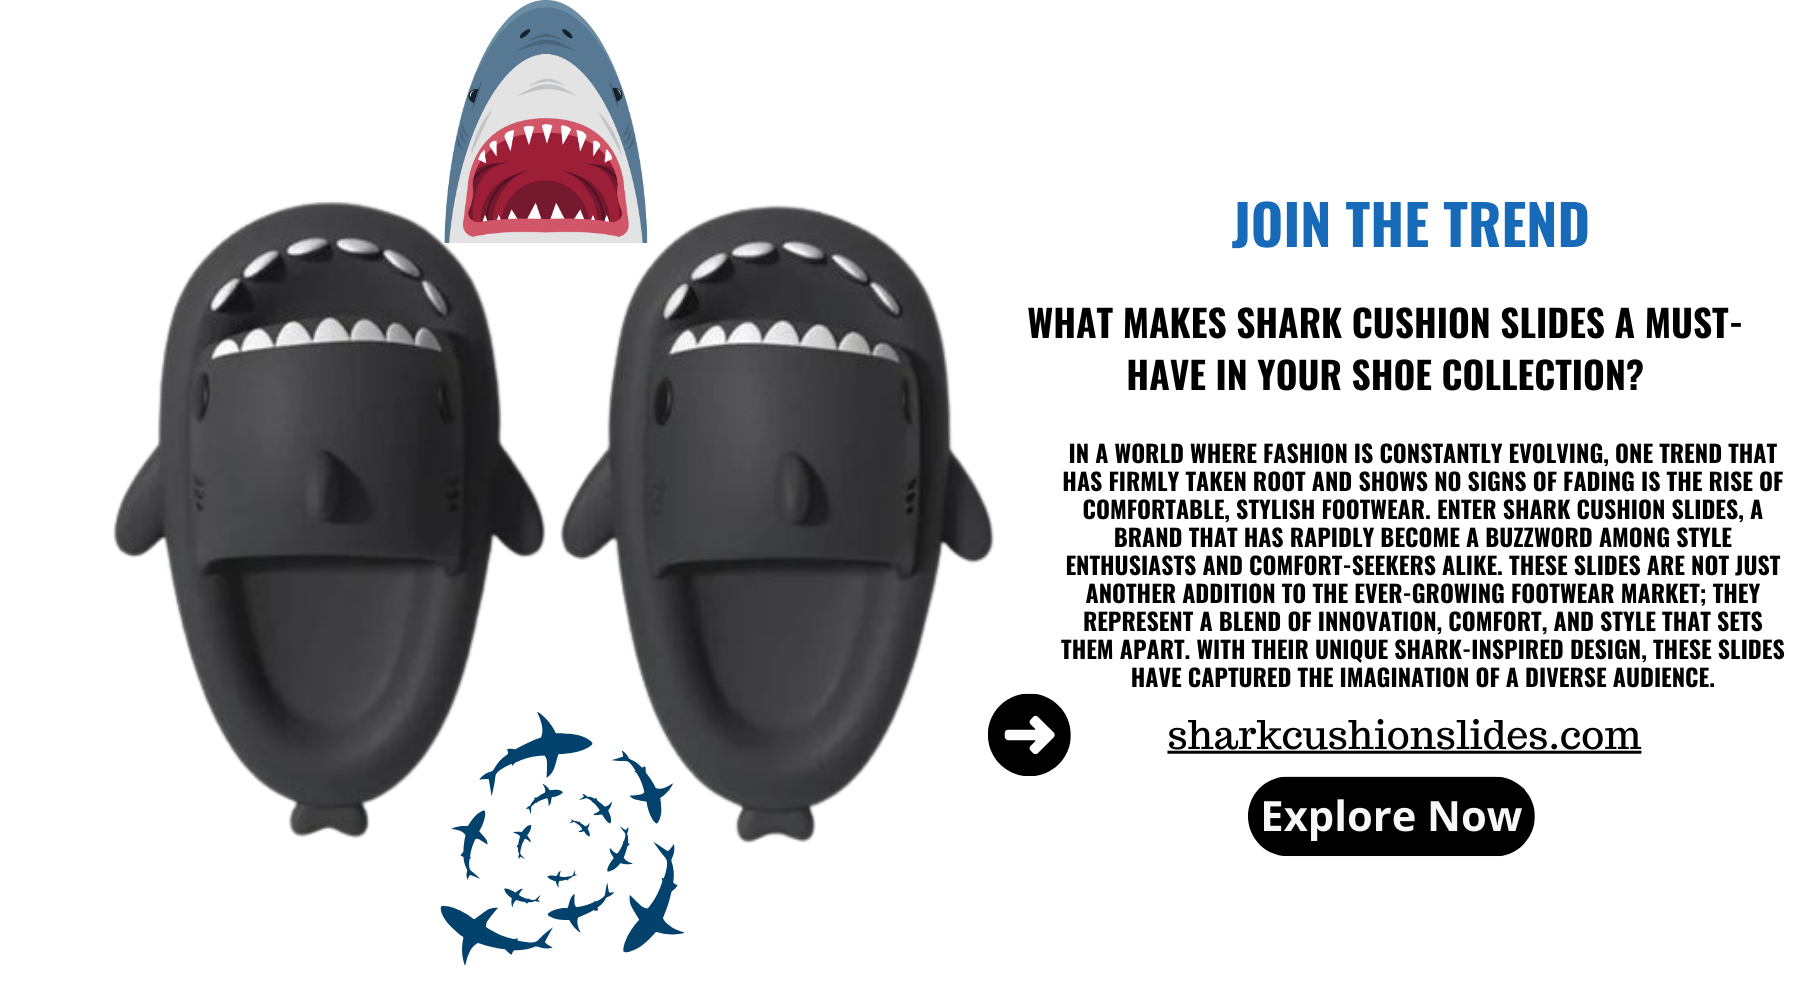 Join the Trend: What Makes Shark Cushion Slides a Must-Have in Your Shoe Collection